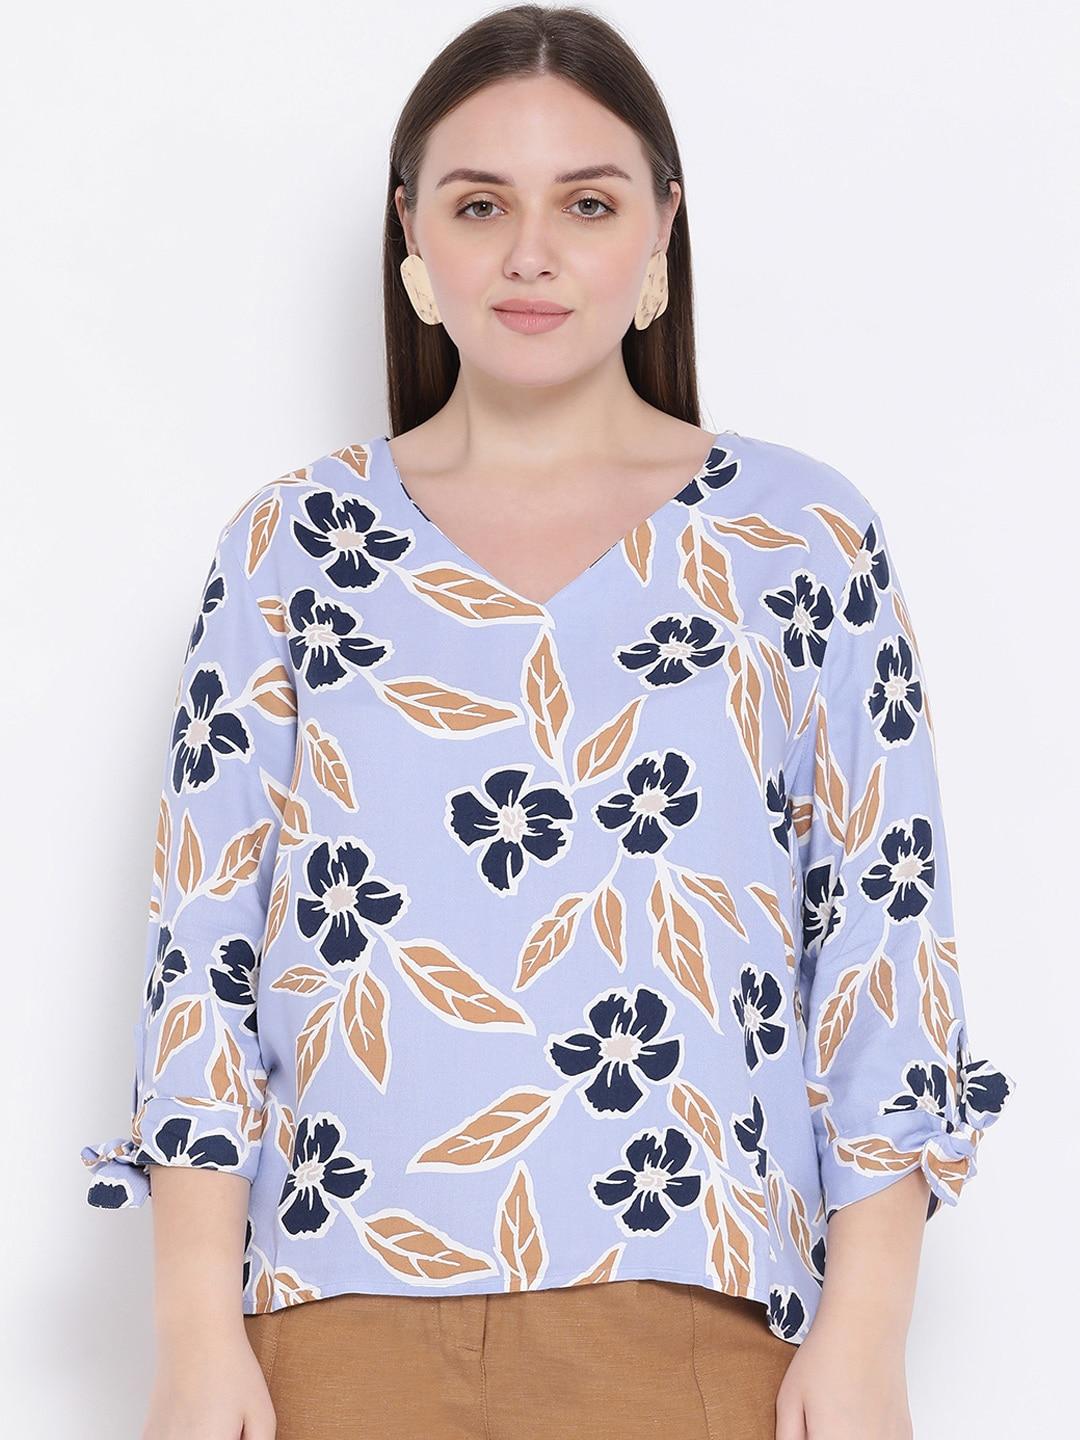 Oxolloxo Women Blue Floral Printed Top